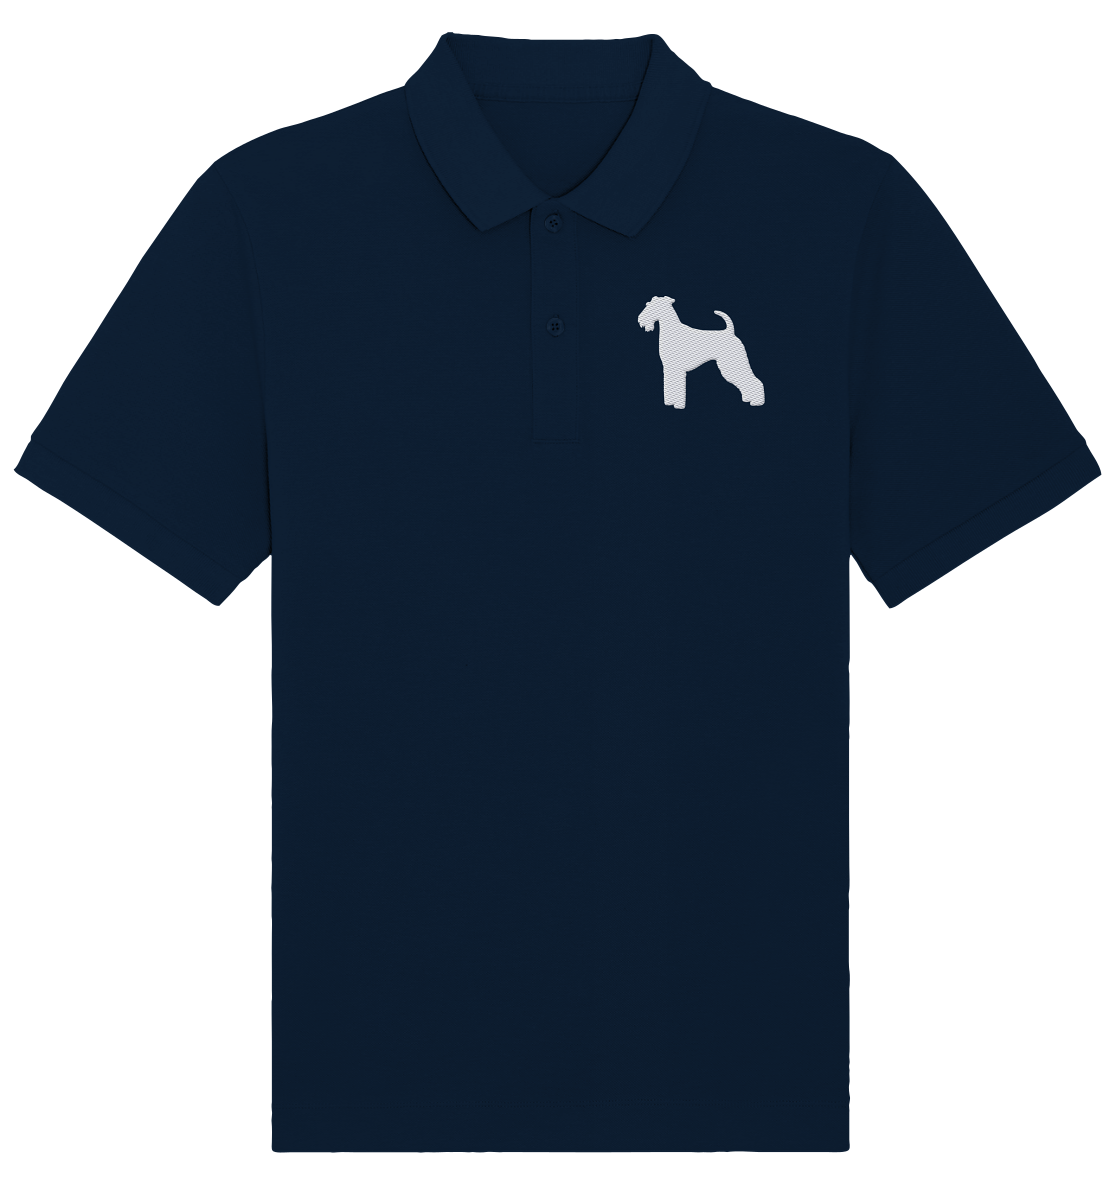 Airedale Terrier-Silhouette - Organic Poloshirt (Stick)